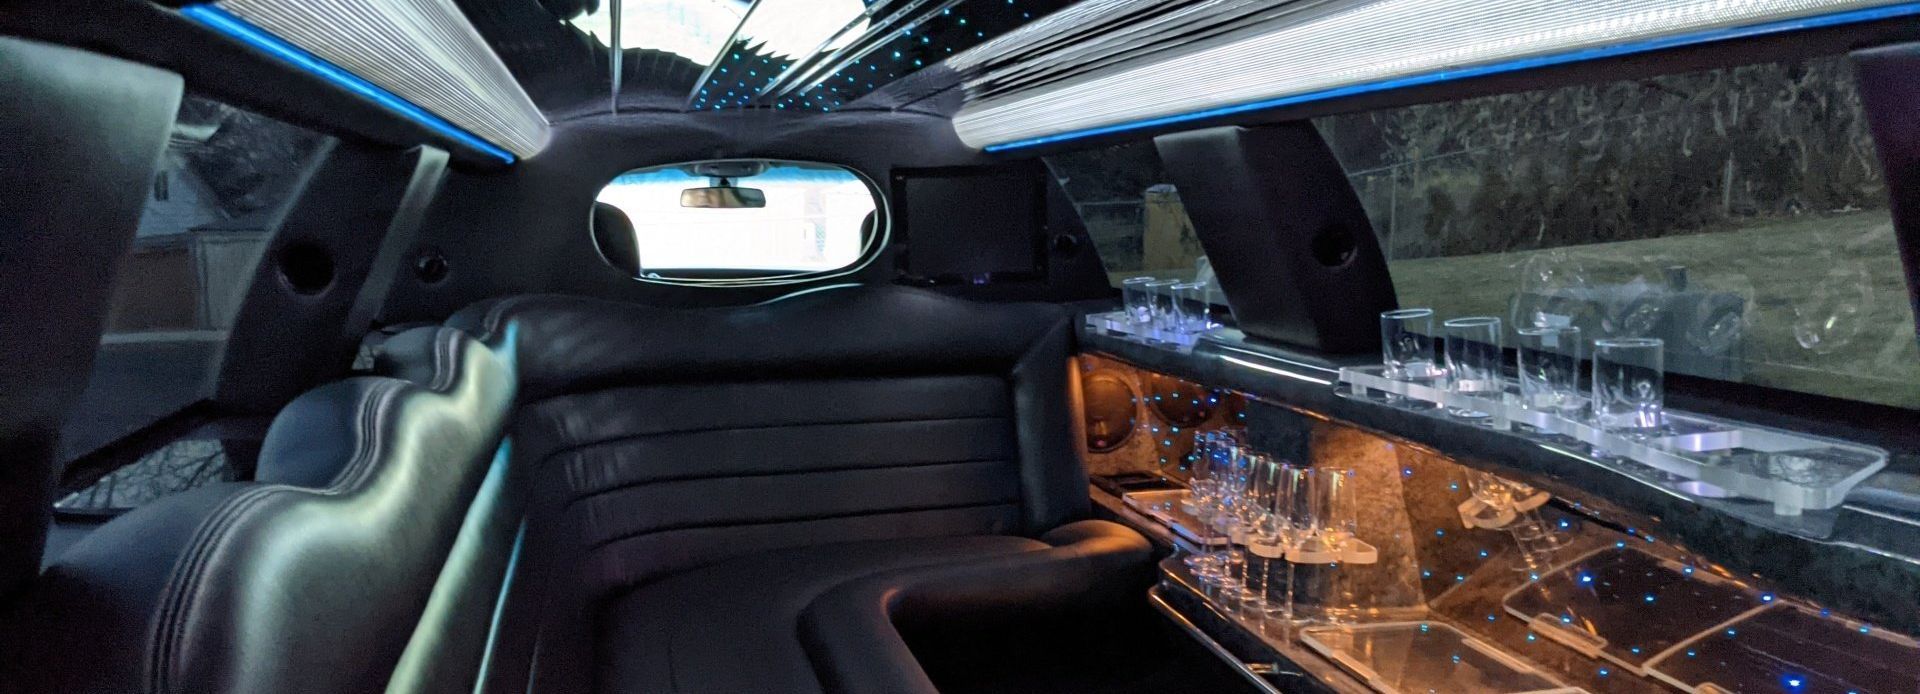 the inside of a limousine with a bar and glasses on it .